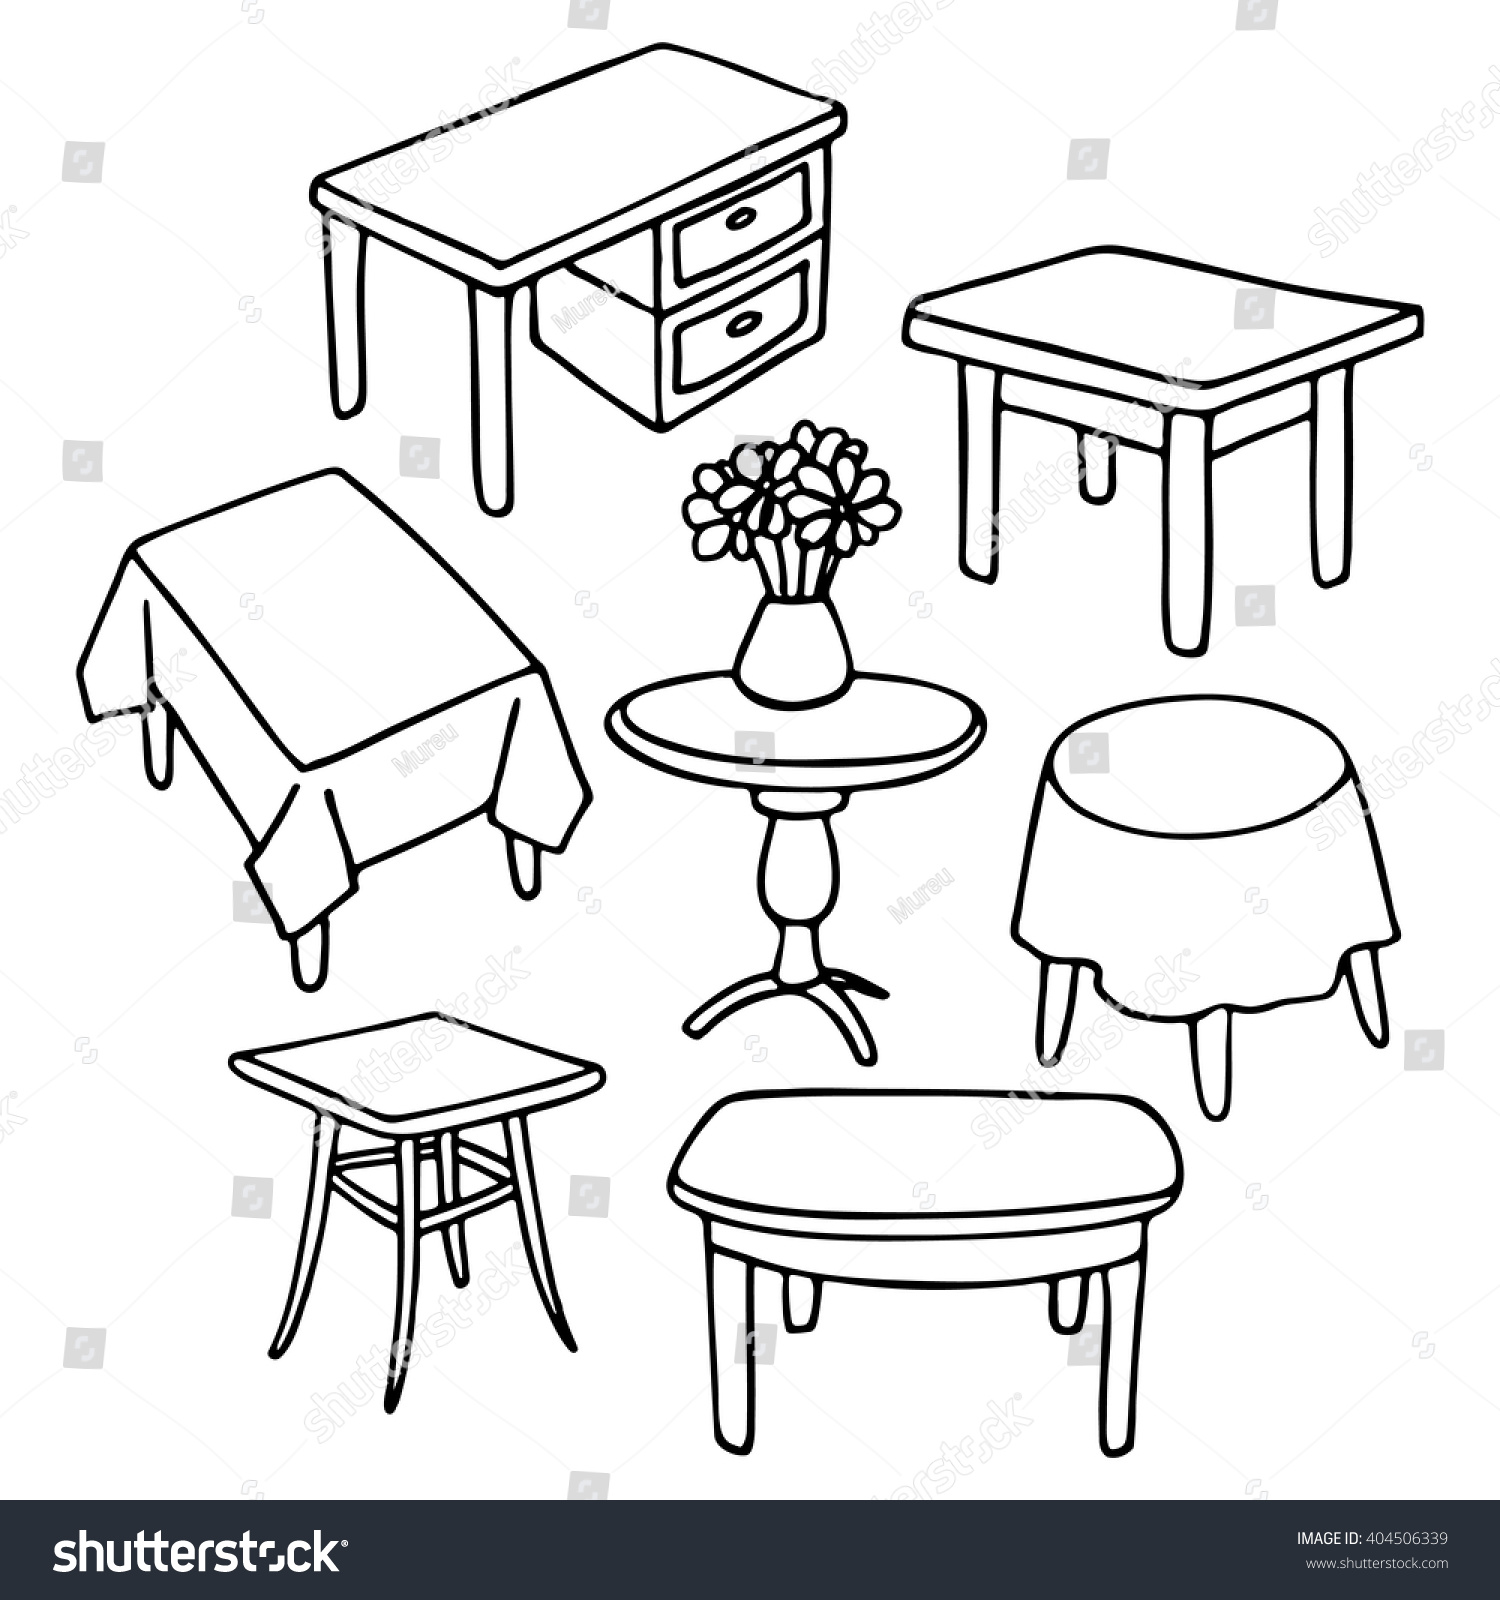 Set Different Tables Set Simple Line Stock Vector ...
